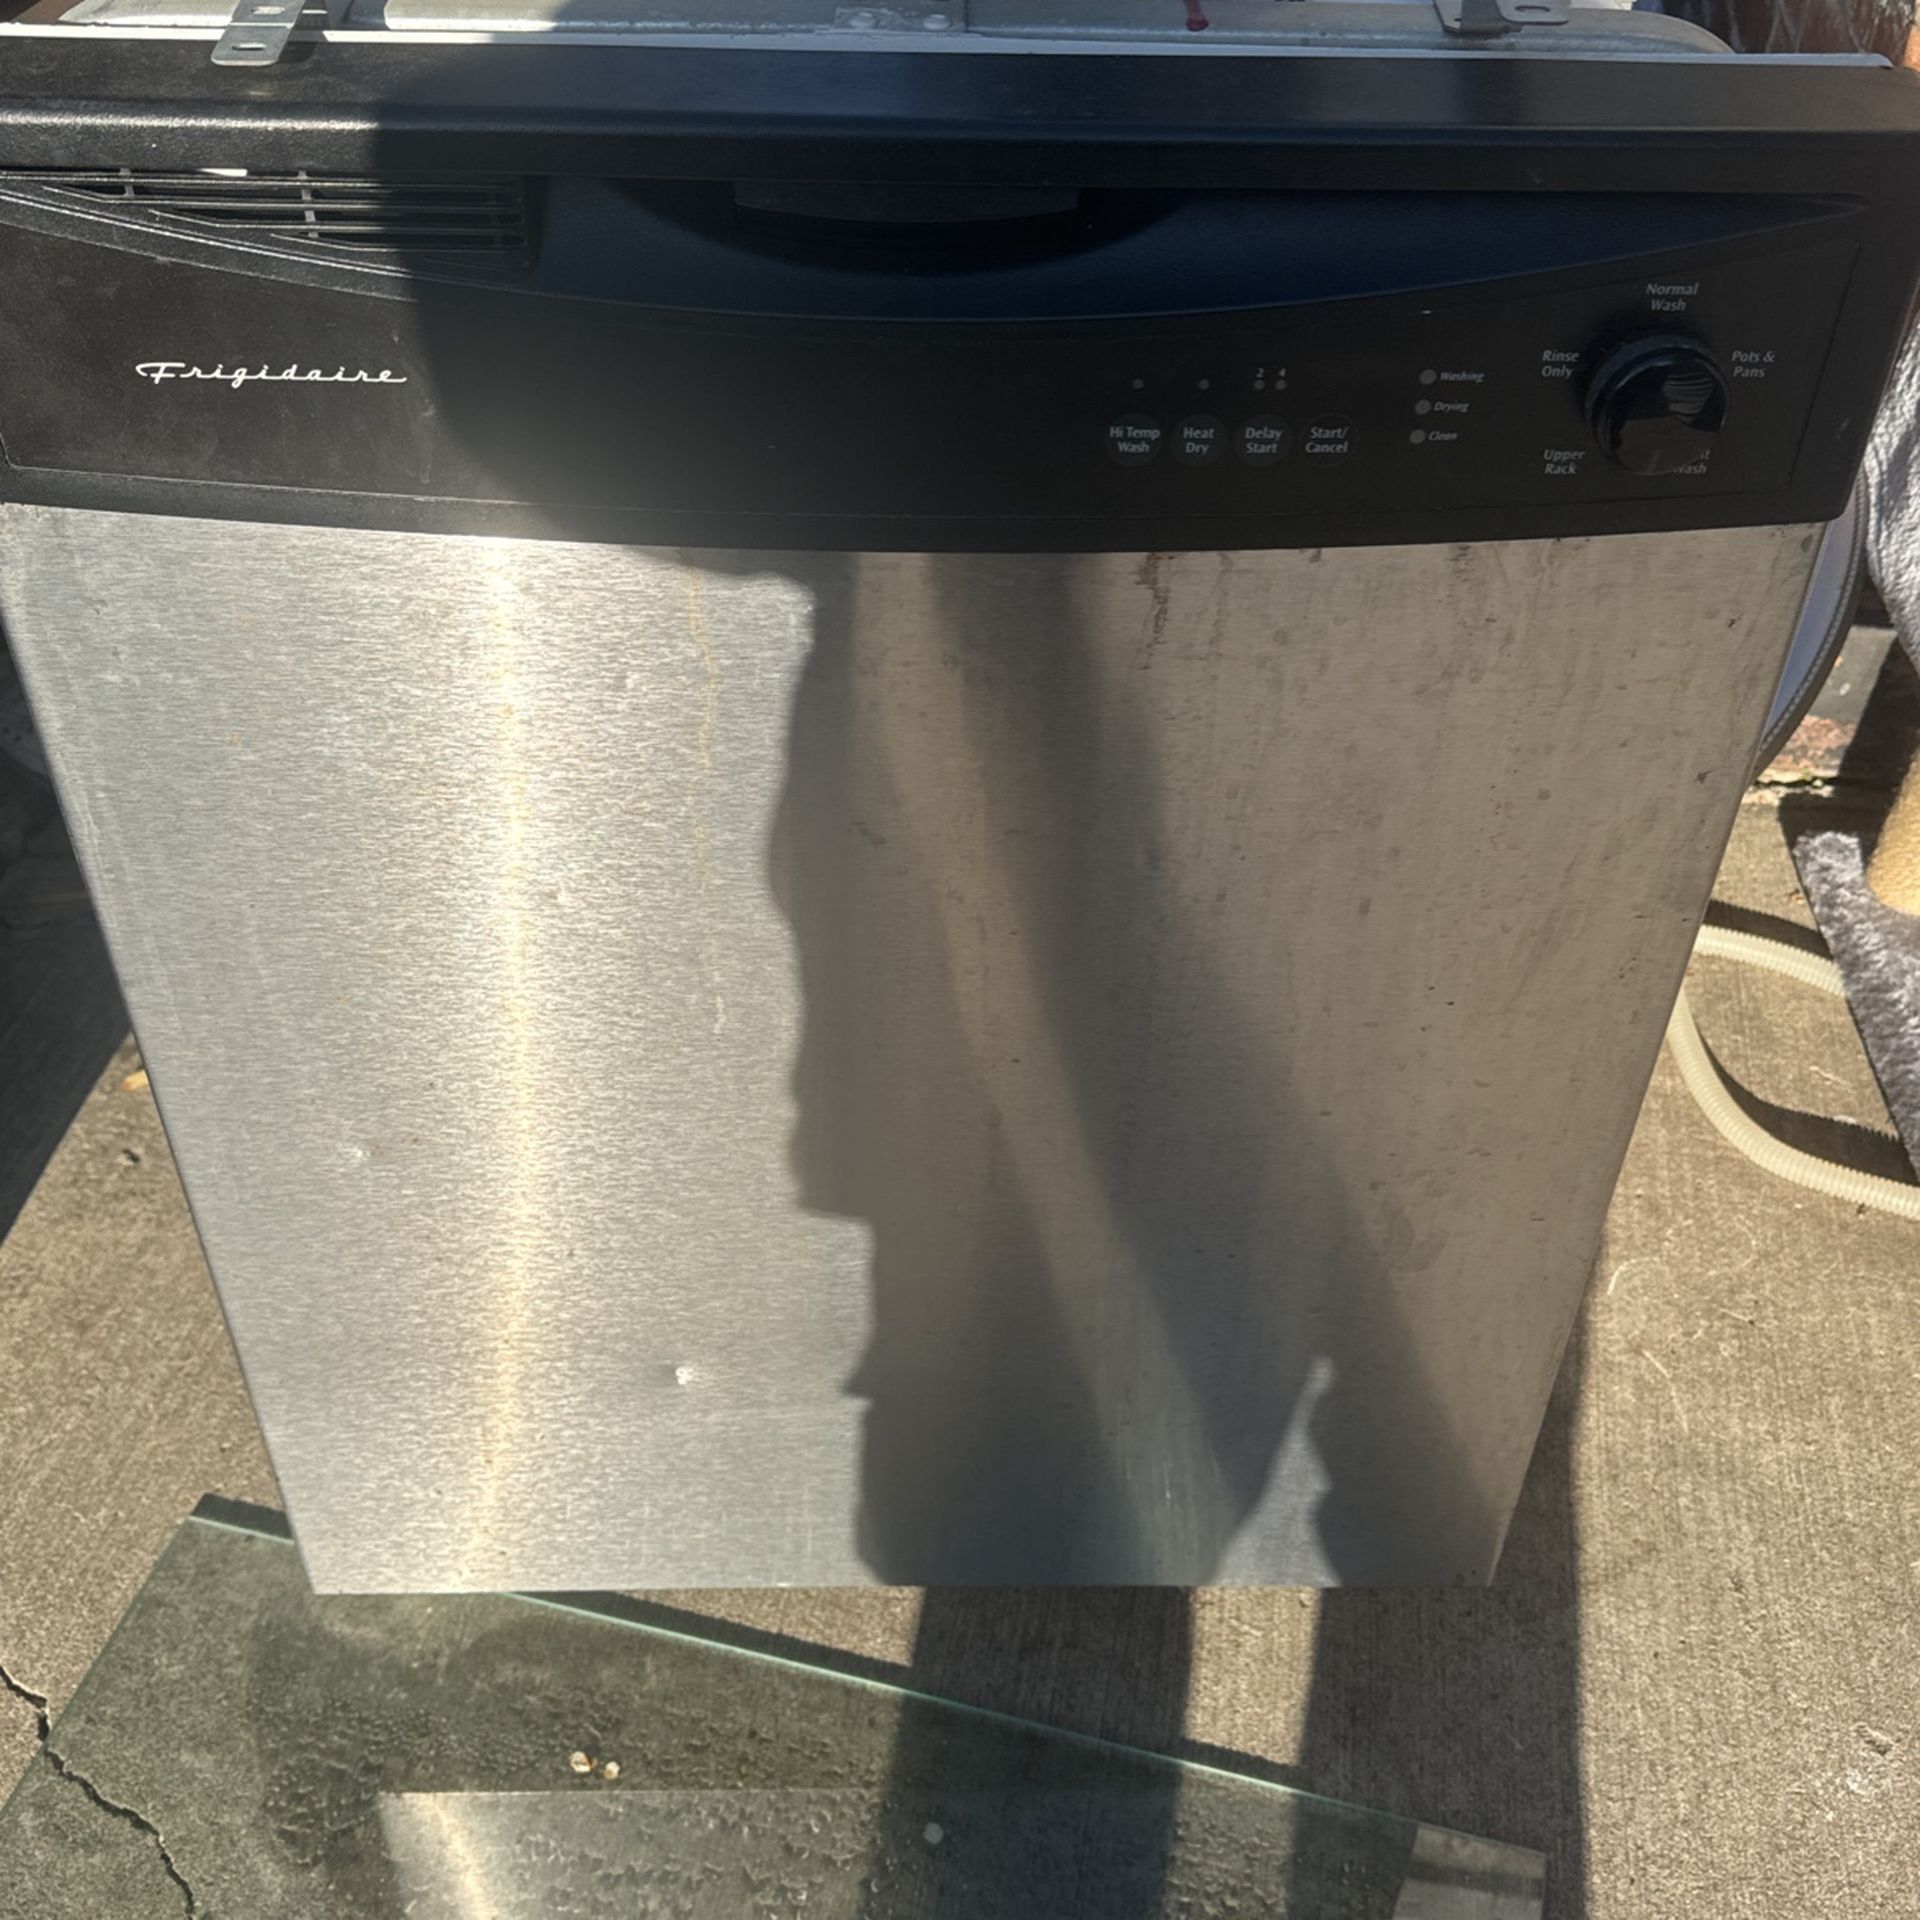 Dishwasher Works Well Just Used Stainless Steel